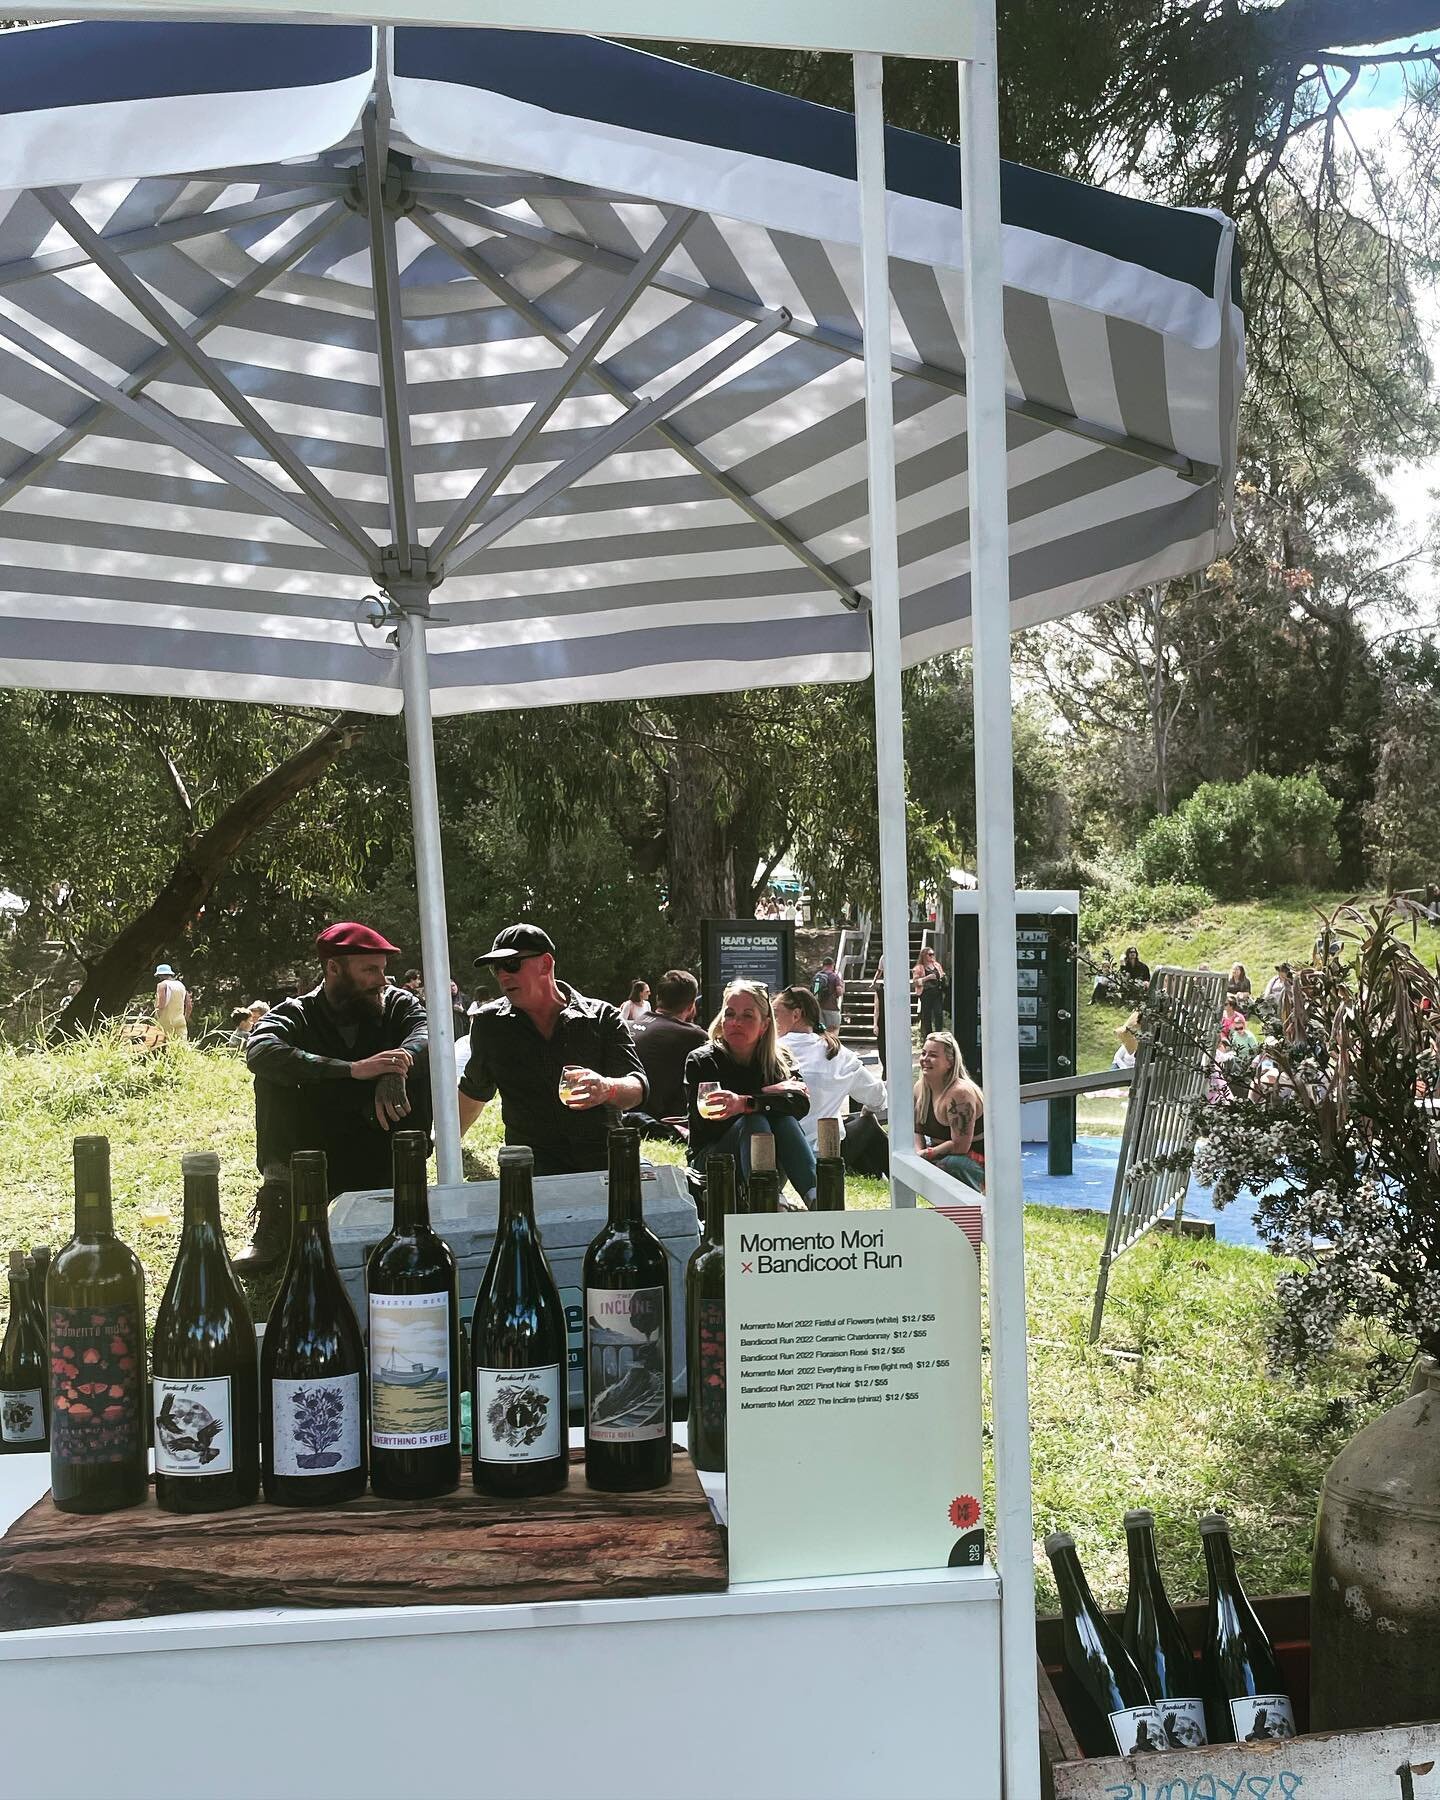 Had the pleasure and honour of sharing a bar with Dane and his @momentomoriwines yesterday at the @melbfoodandwine Village Feast in Inverloch. 
The energy was high and we feel very lucky to be apart of the Gippsland food and wine community. 
Thanks t